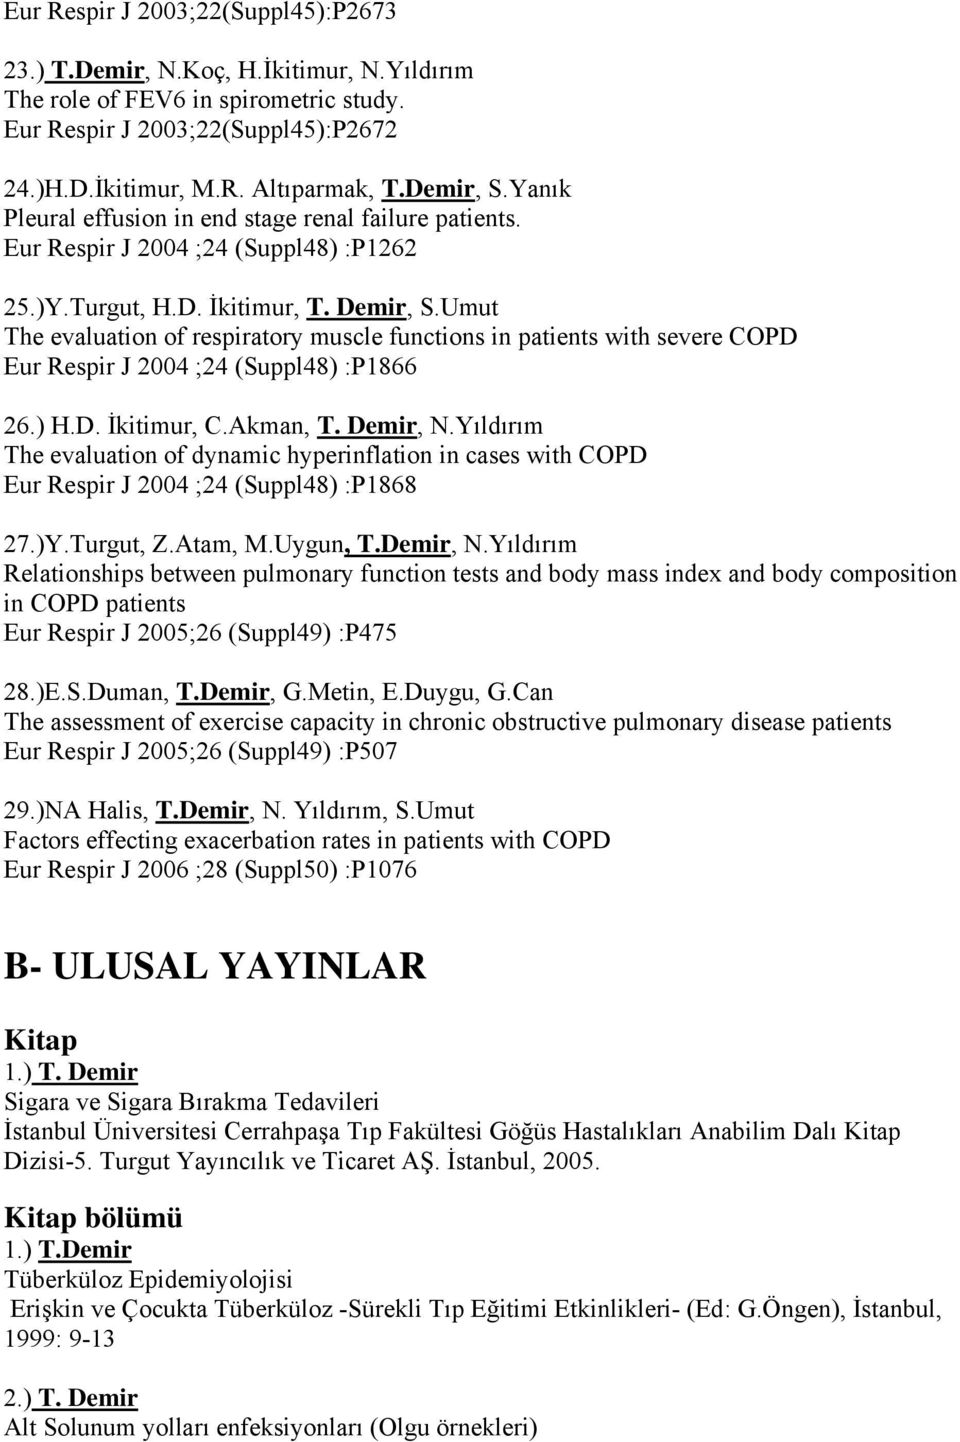 Umut The evaluation of respiratory muscle functions in patients with severe COPD Eur Respir J 2004 ;24 (Suppl48) :P1866 26.) H.D. İkitimur, C.Akman, T. Demir, N.